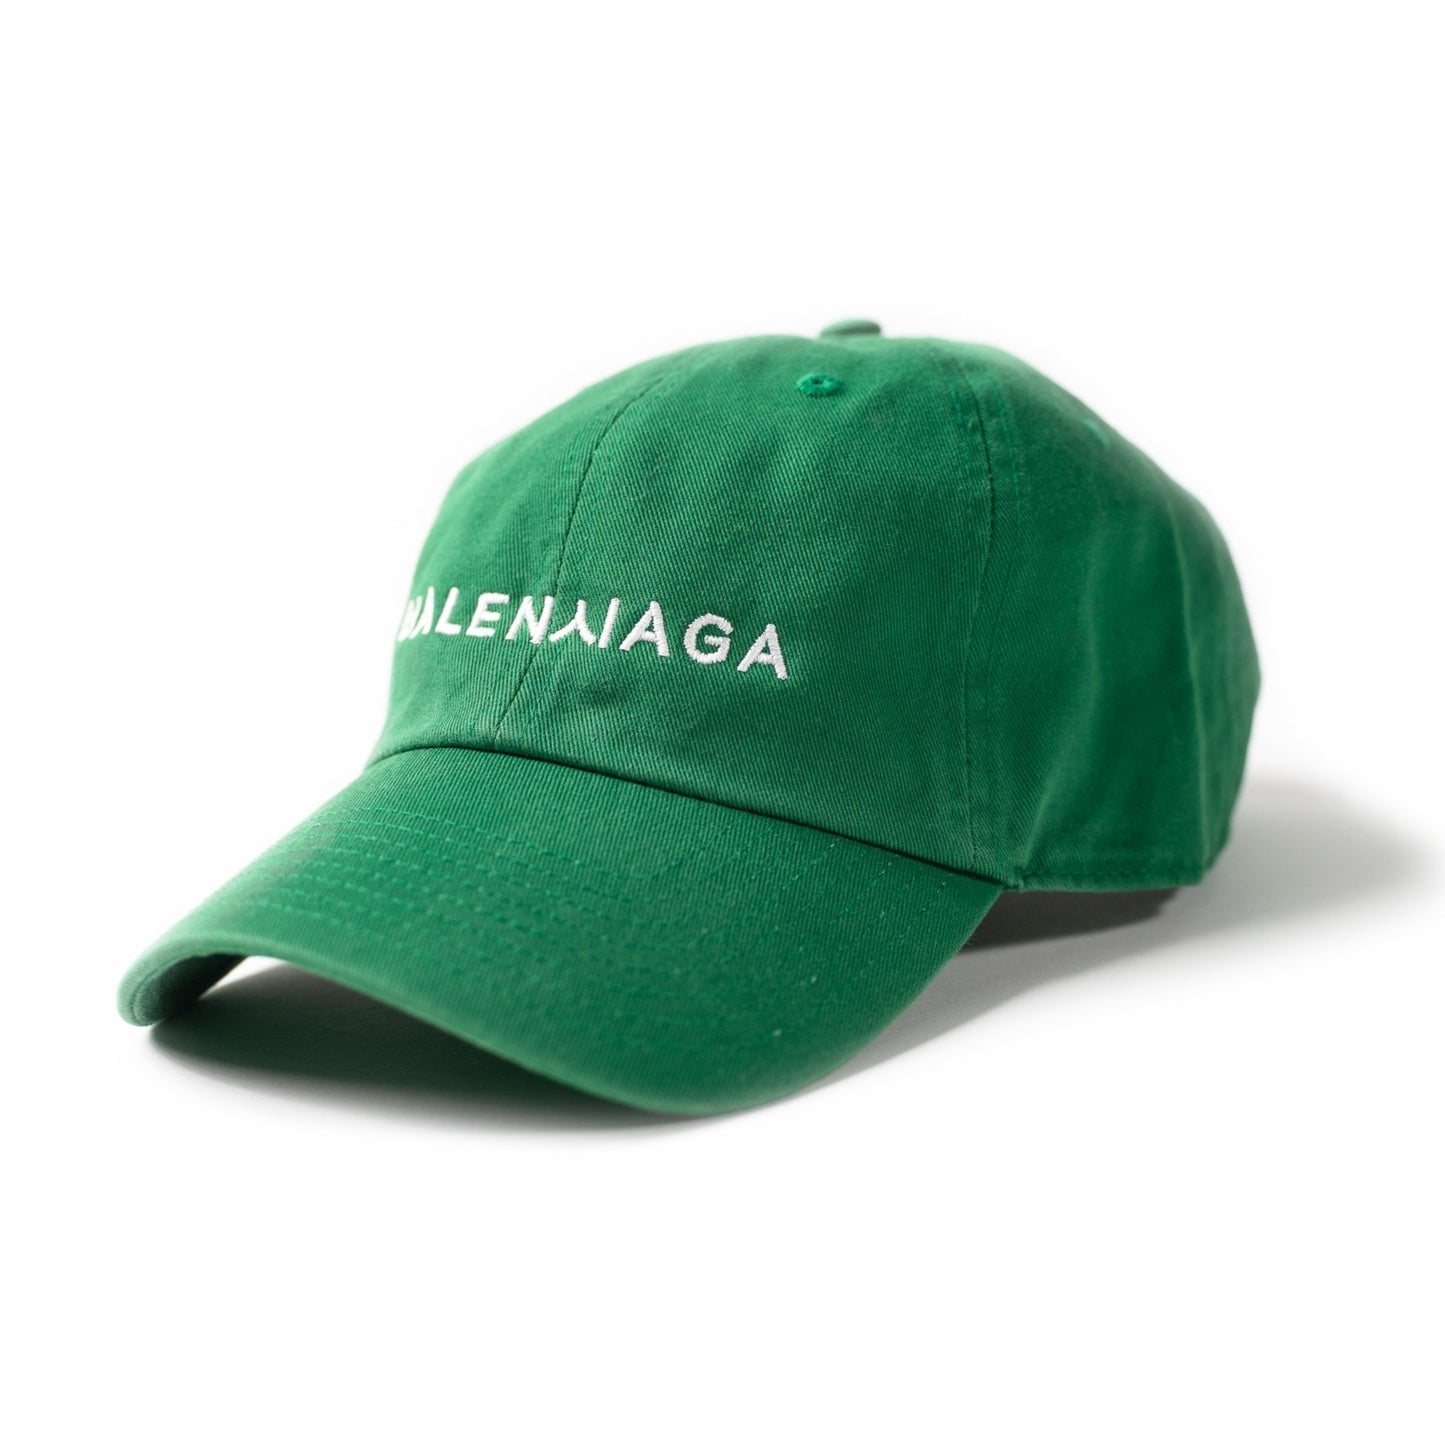 the $450 BS hat